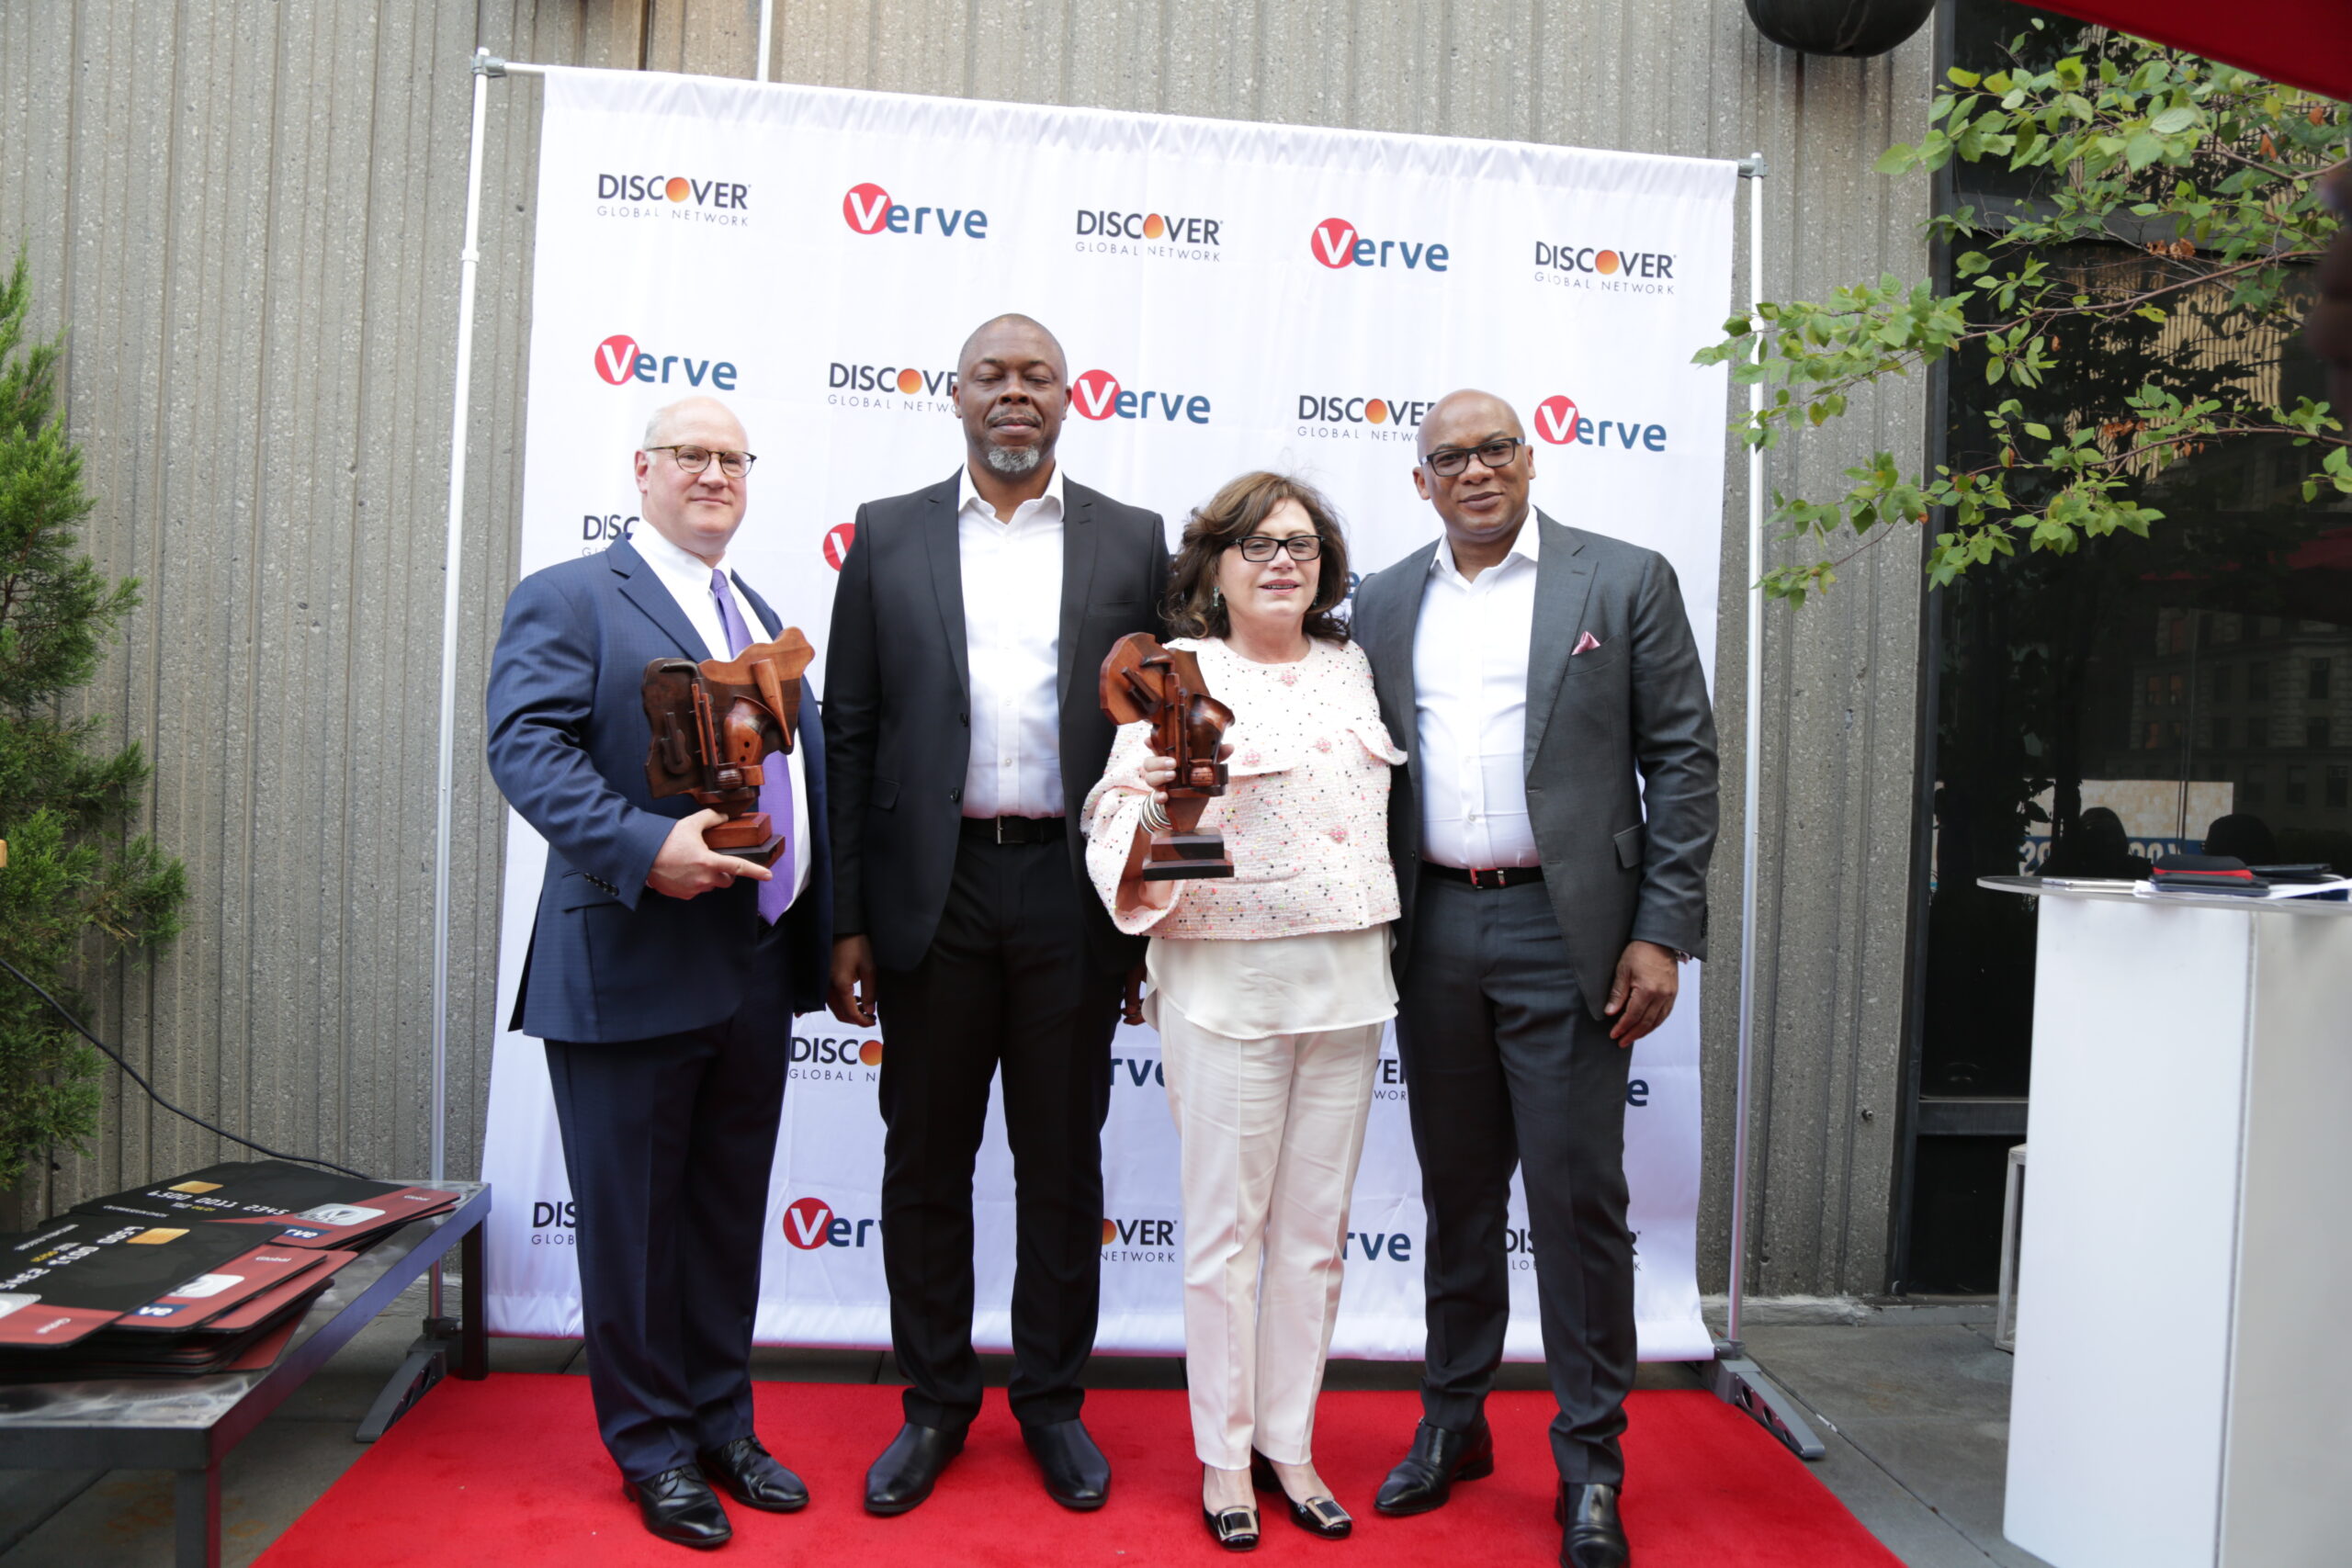 L-R: Joseph Hurley, Snr. Vice President, Payment Services, Discover Financial Services, Mike Ogbalu 111, Divisional CEO, Verve, Diane Offereins, Executive Vice President, Payment Services, Discover, and Mitchell Elegbe, Founder/GMD Interswitch Group, at the Verve Global Card Launch in New York, on Monday.